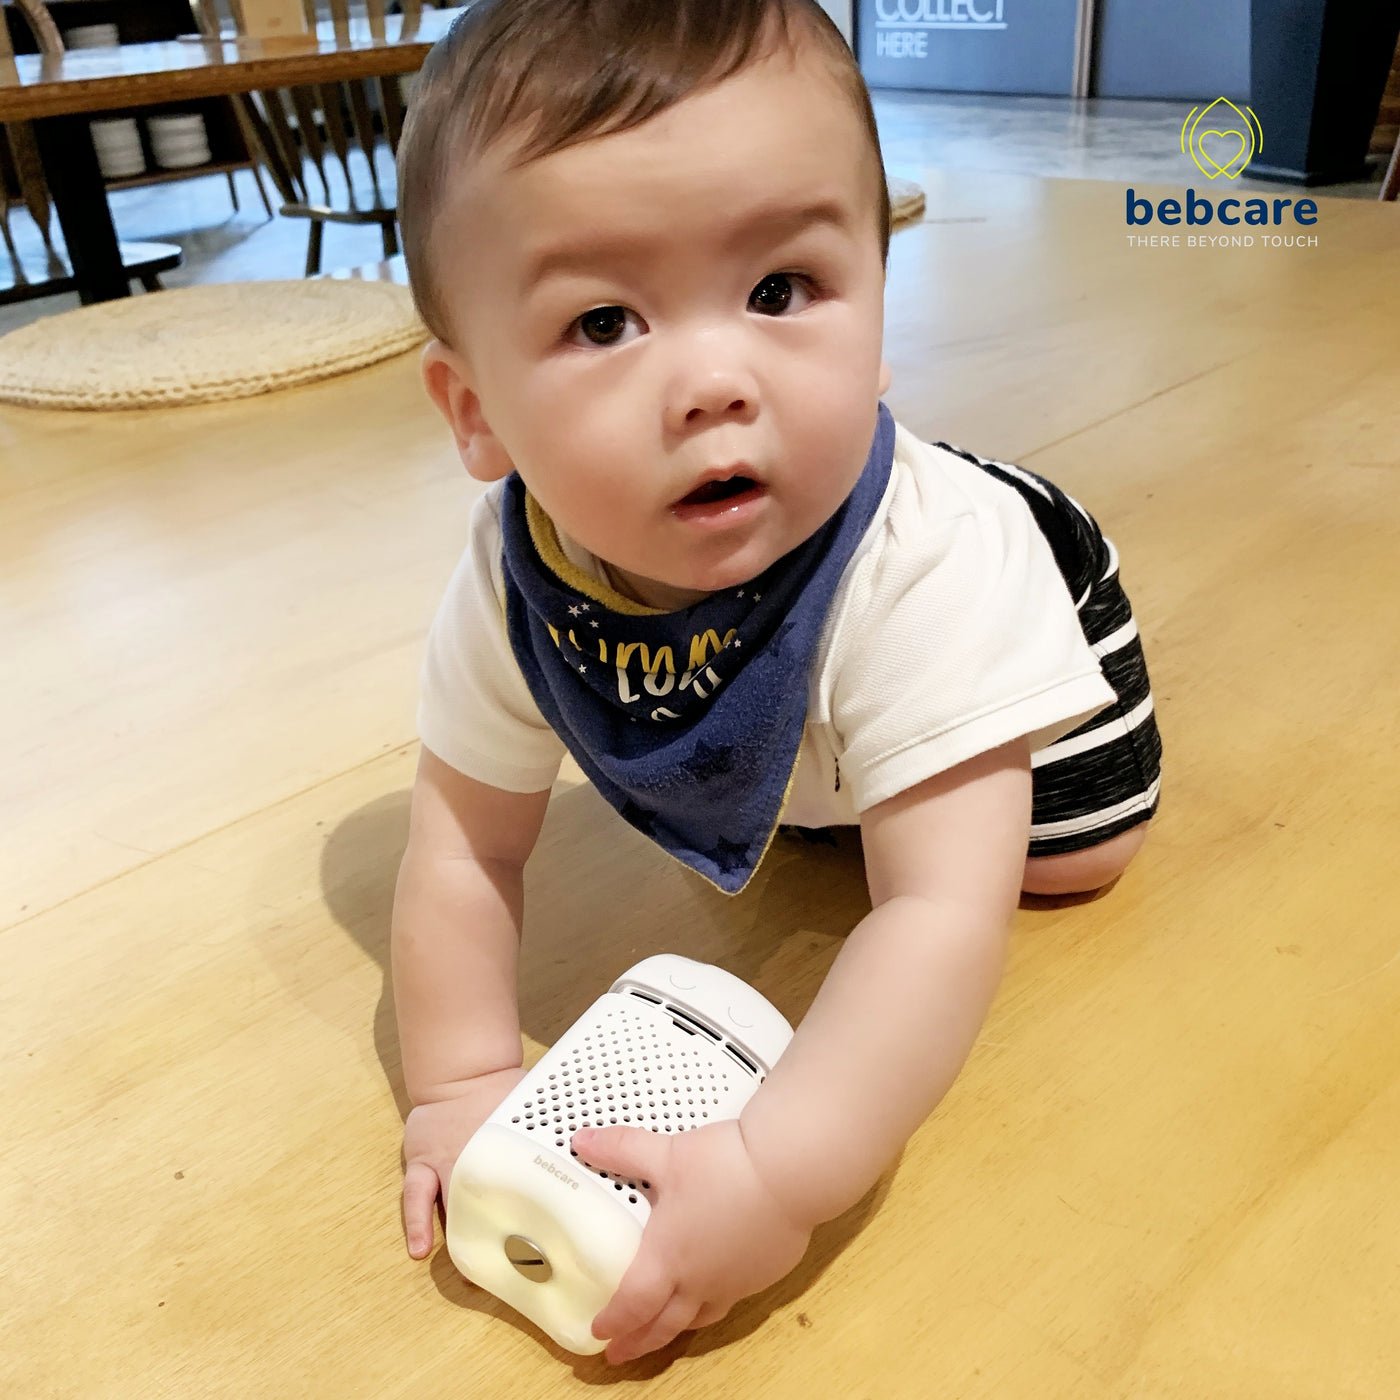 Bebcare Air is made with baby safe materials